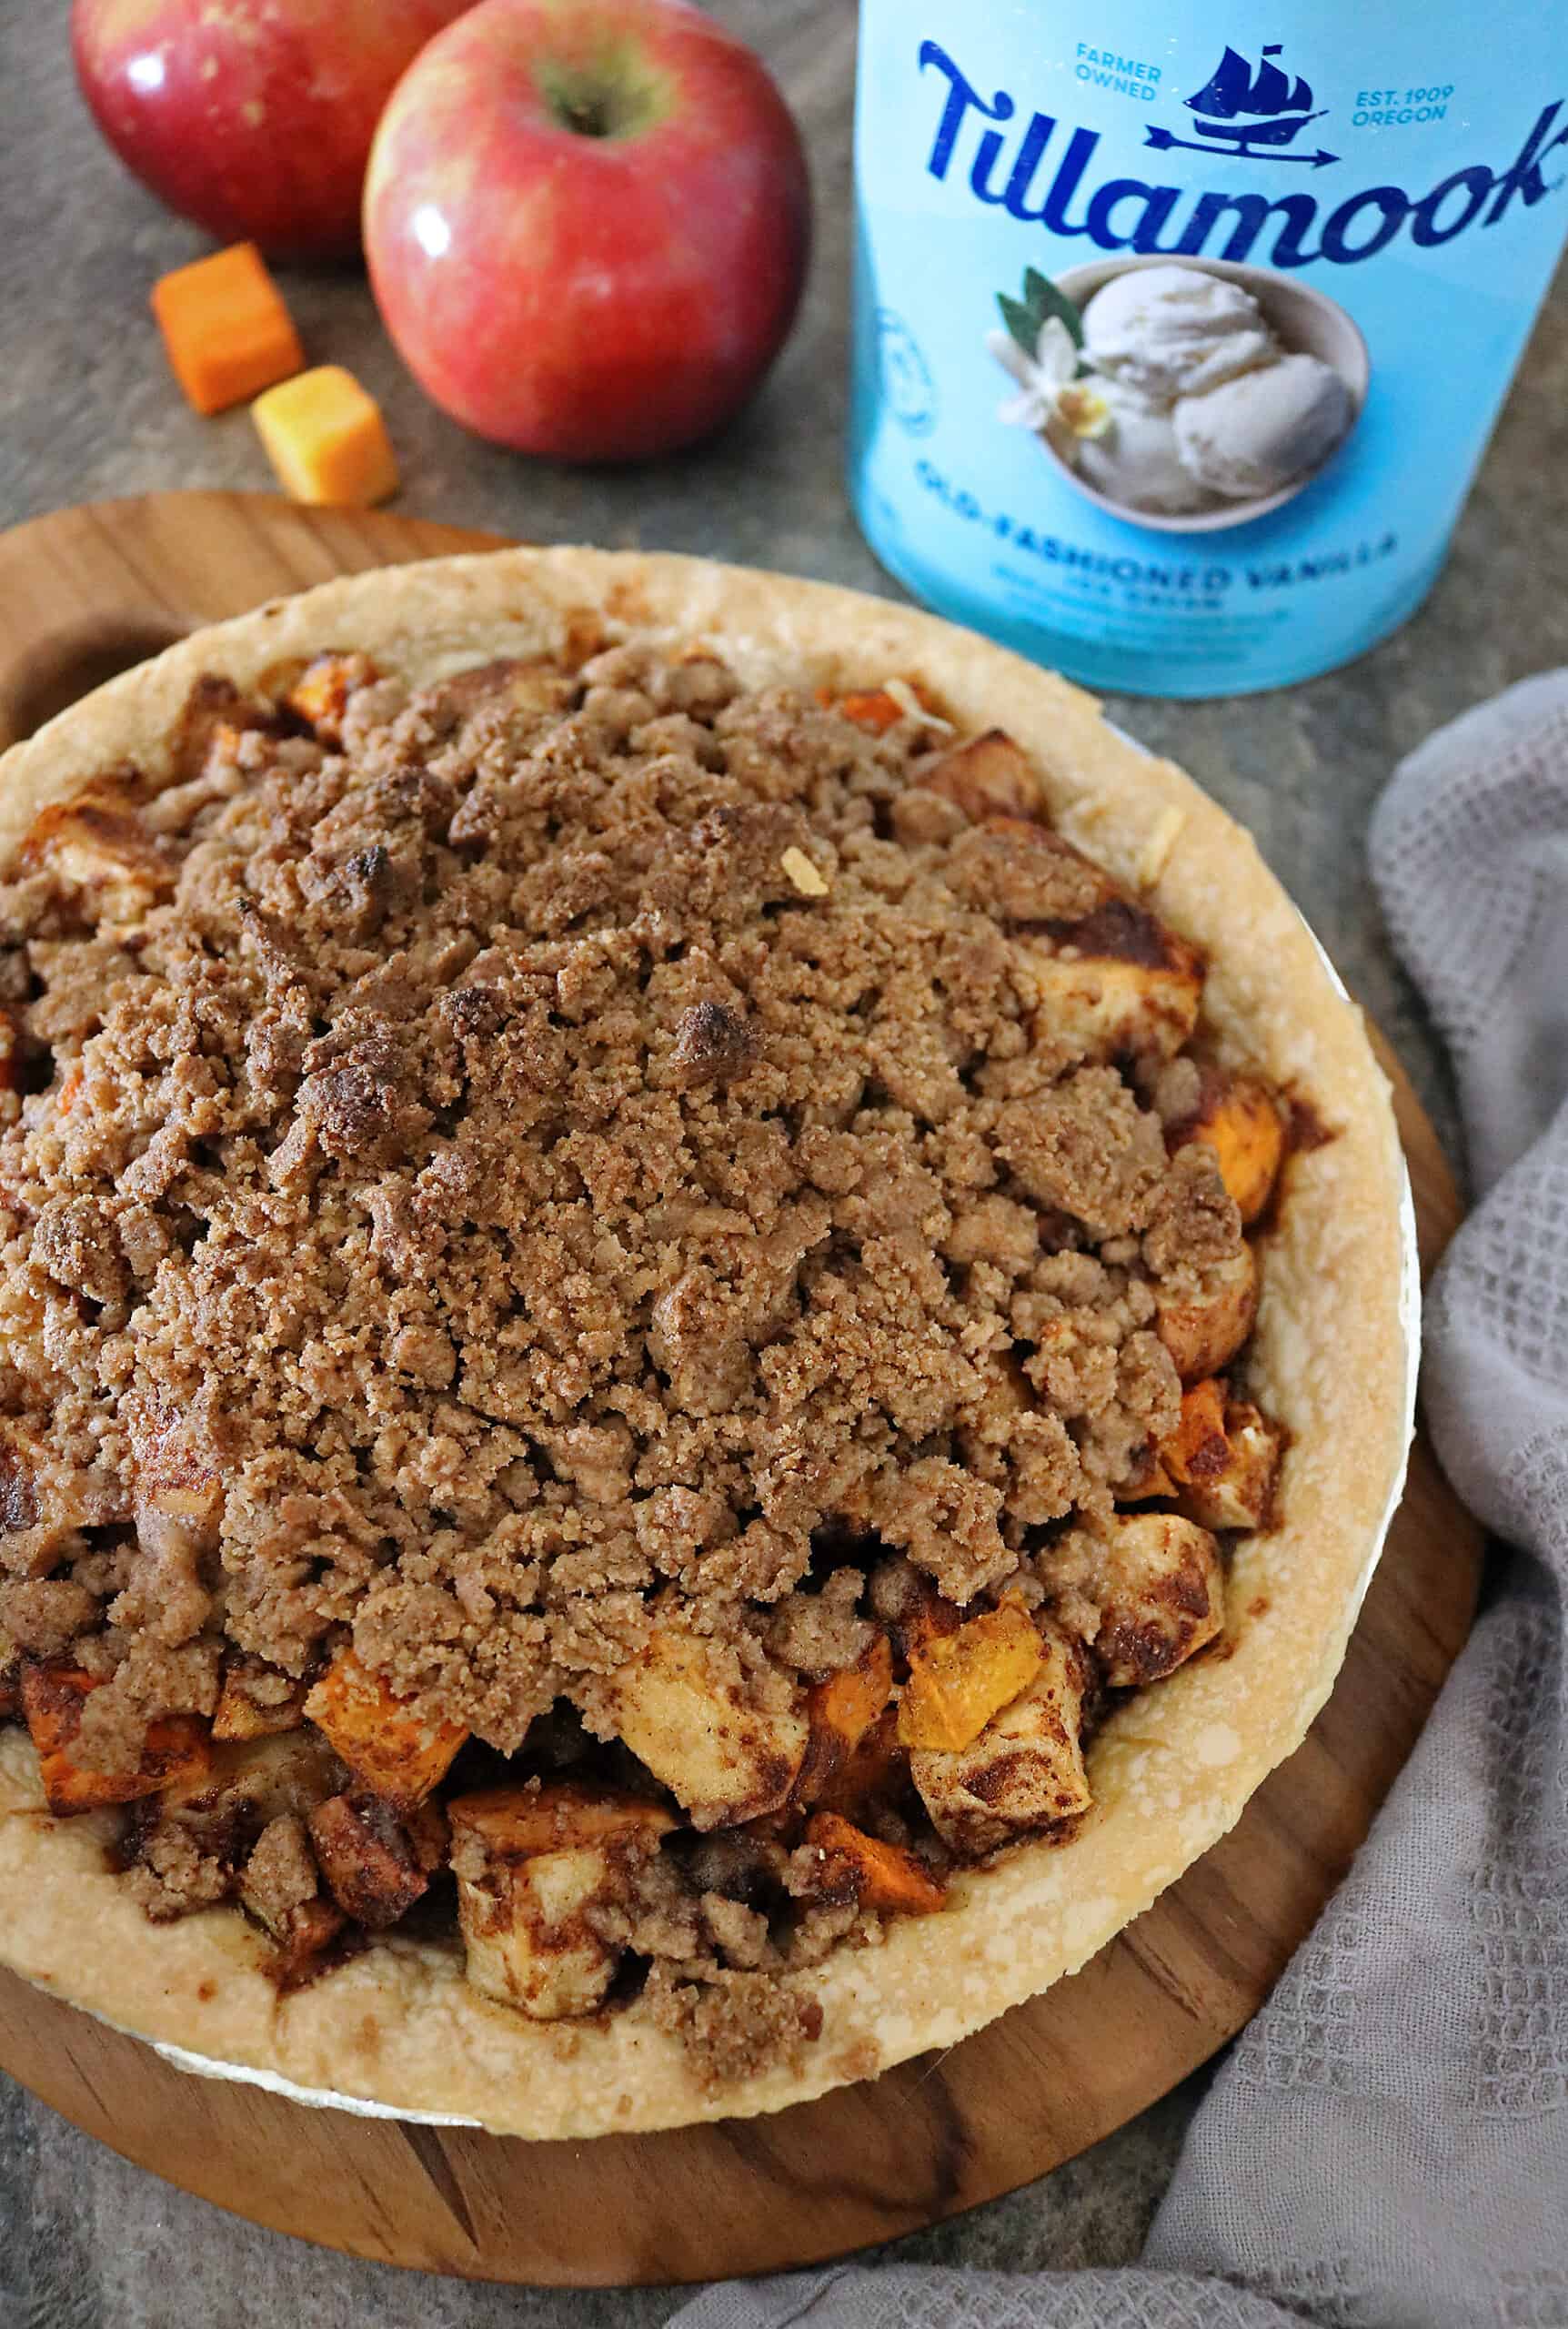 Delicious Apple Crumble Pie with butternut squash